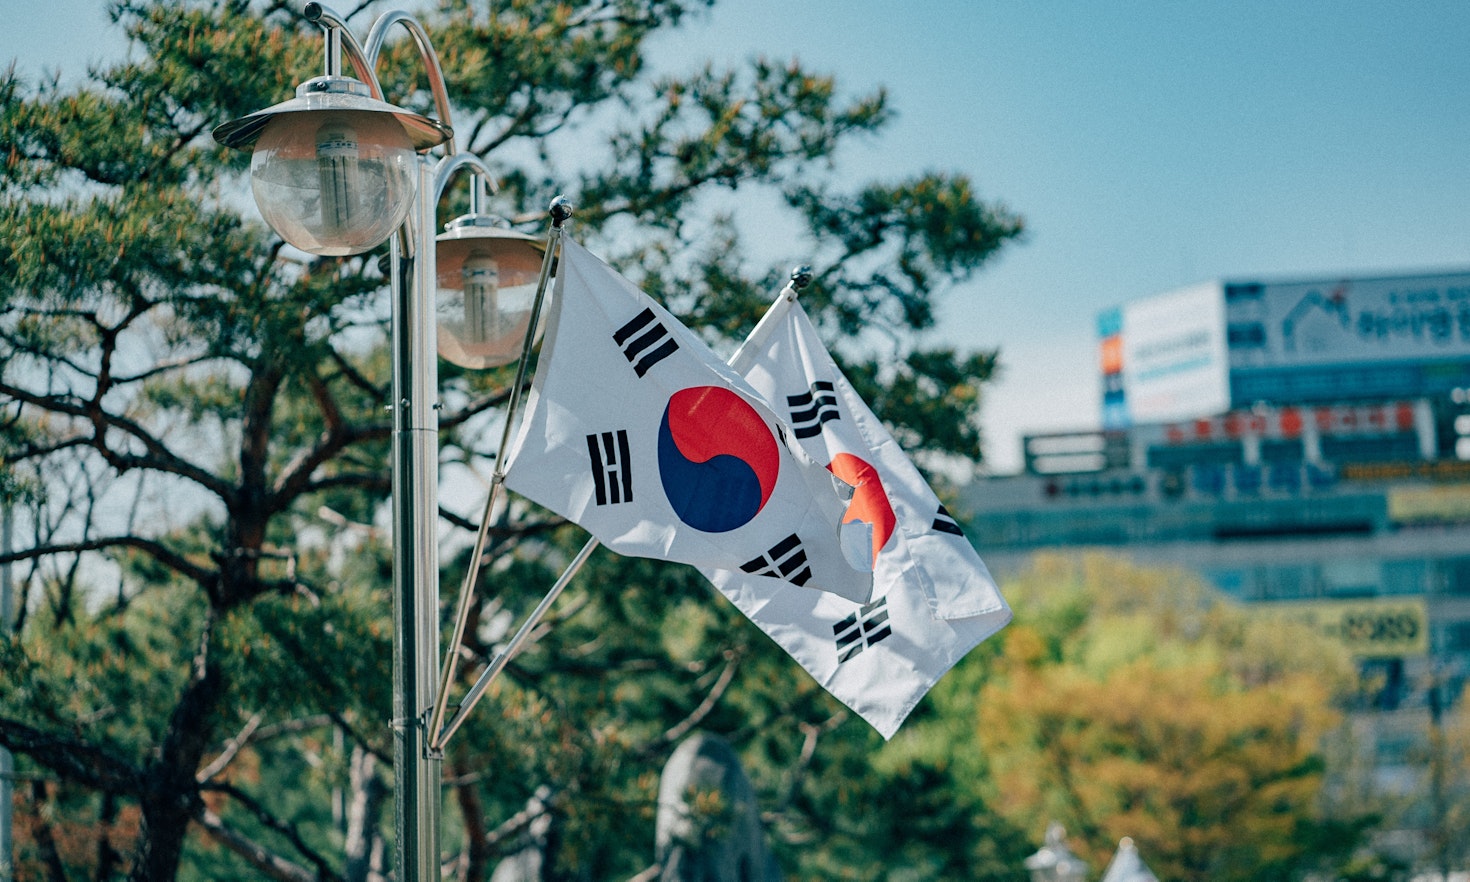 South Korea and Japan - Healing from the past 